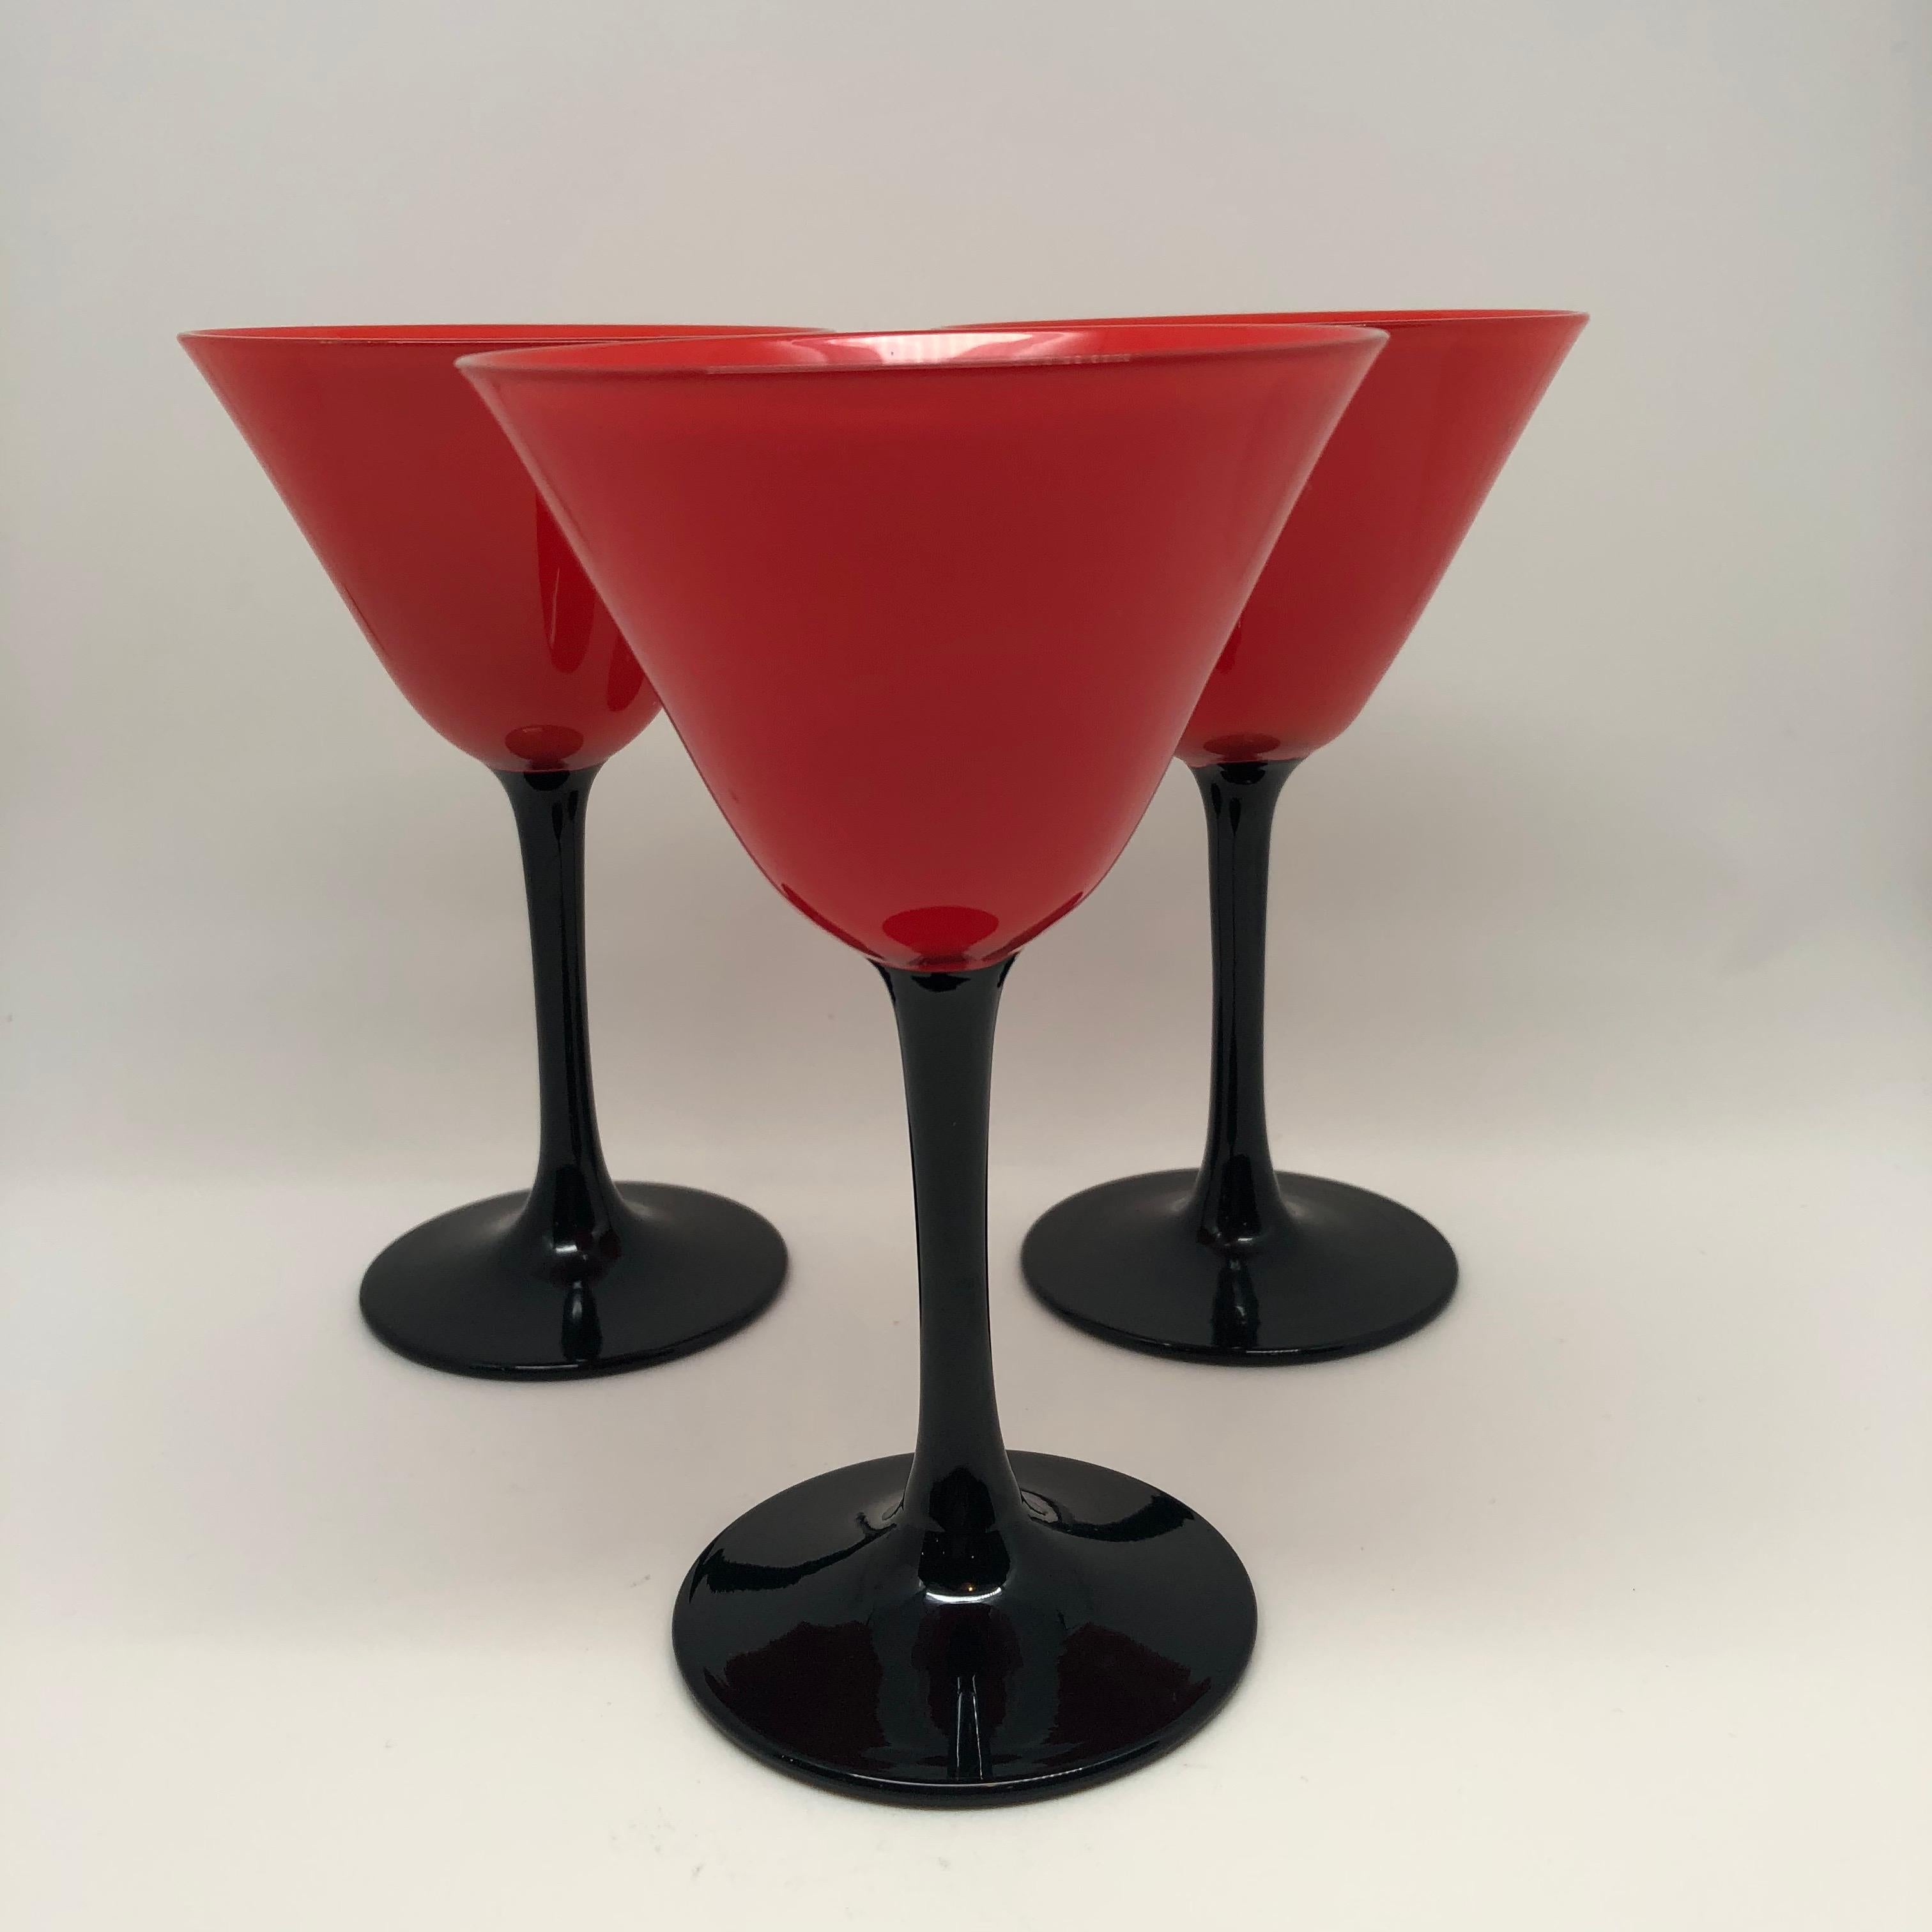 This is a fabulous set of eleven Pairpoint Art Deco stemware glasses with a striking color combination of red tops and black stems. This rare set is from the 1920s. They are 5 1/8 inches tall. Price for set is $895.00.